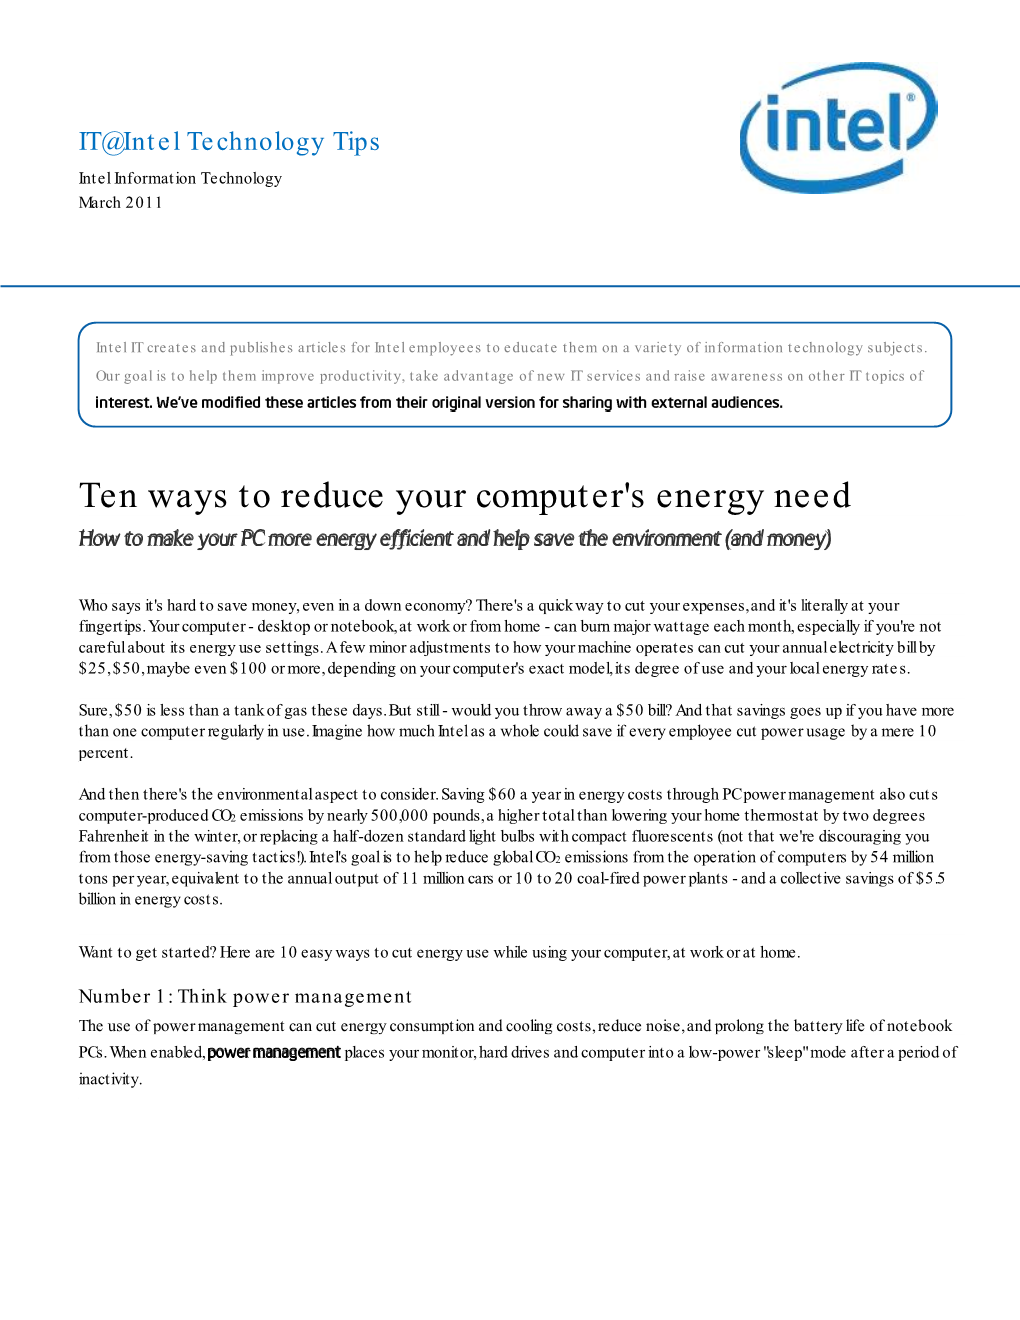 Ten Ways to Reduce Your Computer's Energy Need How to Make Your PC More Energy Efficient and Help Save the Environment (And Money)